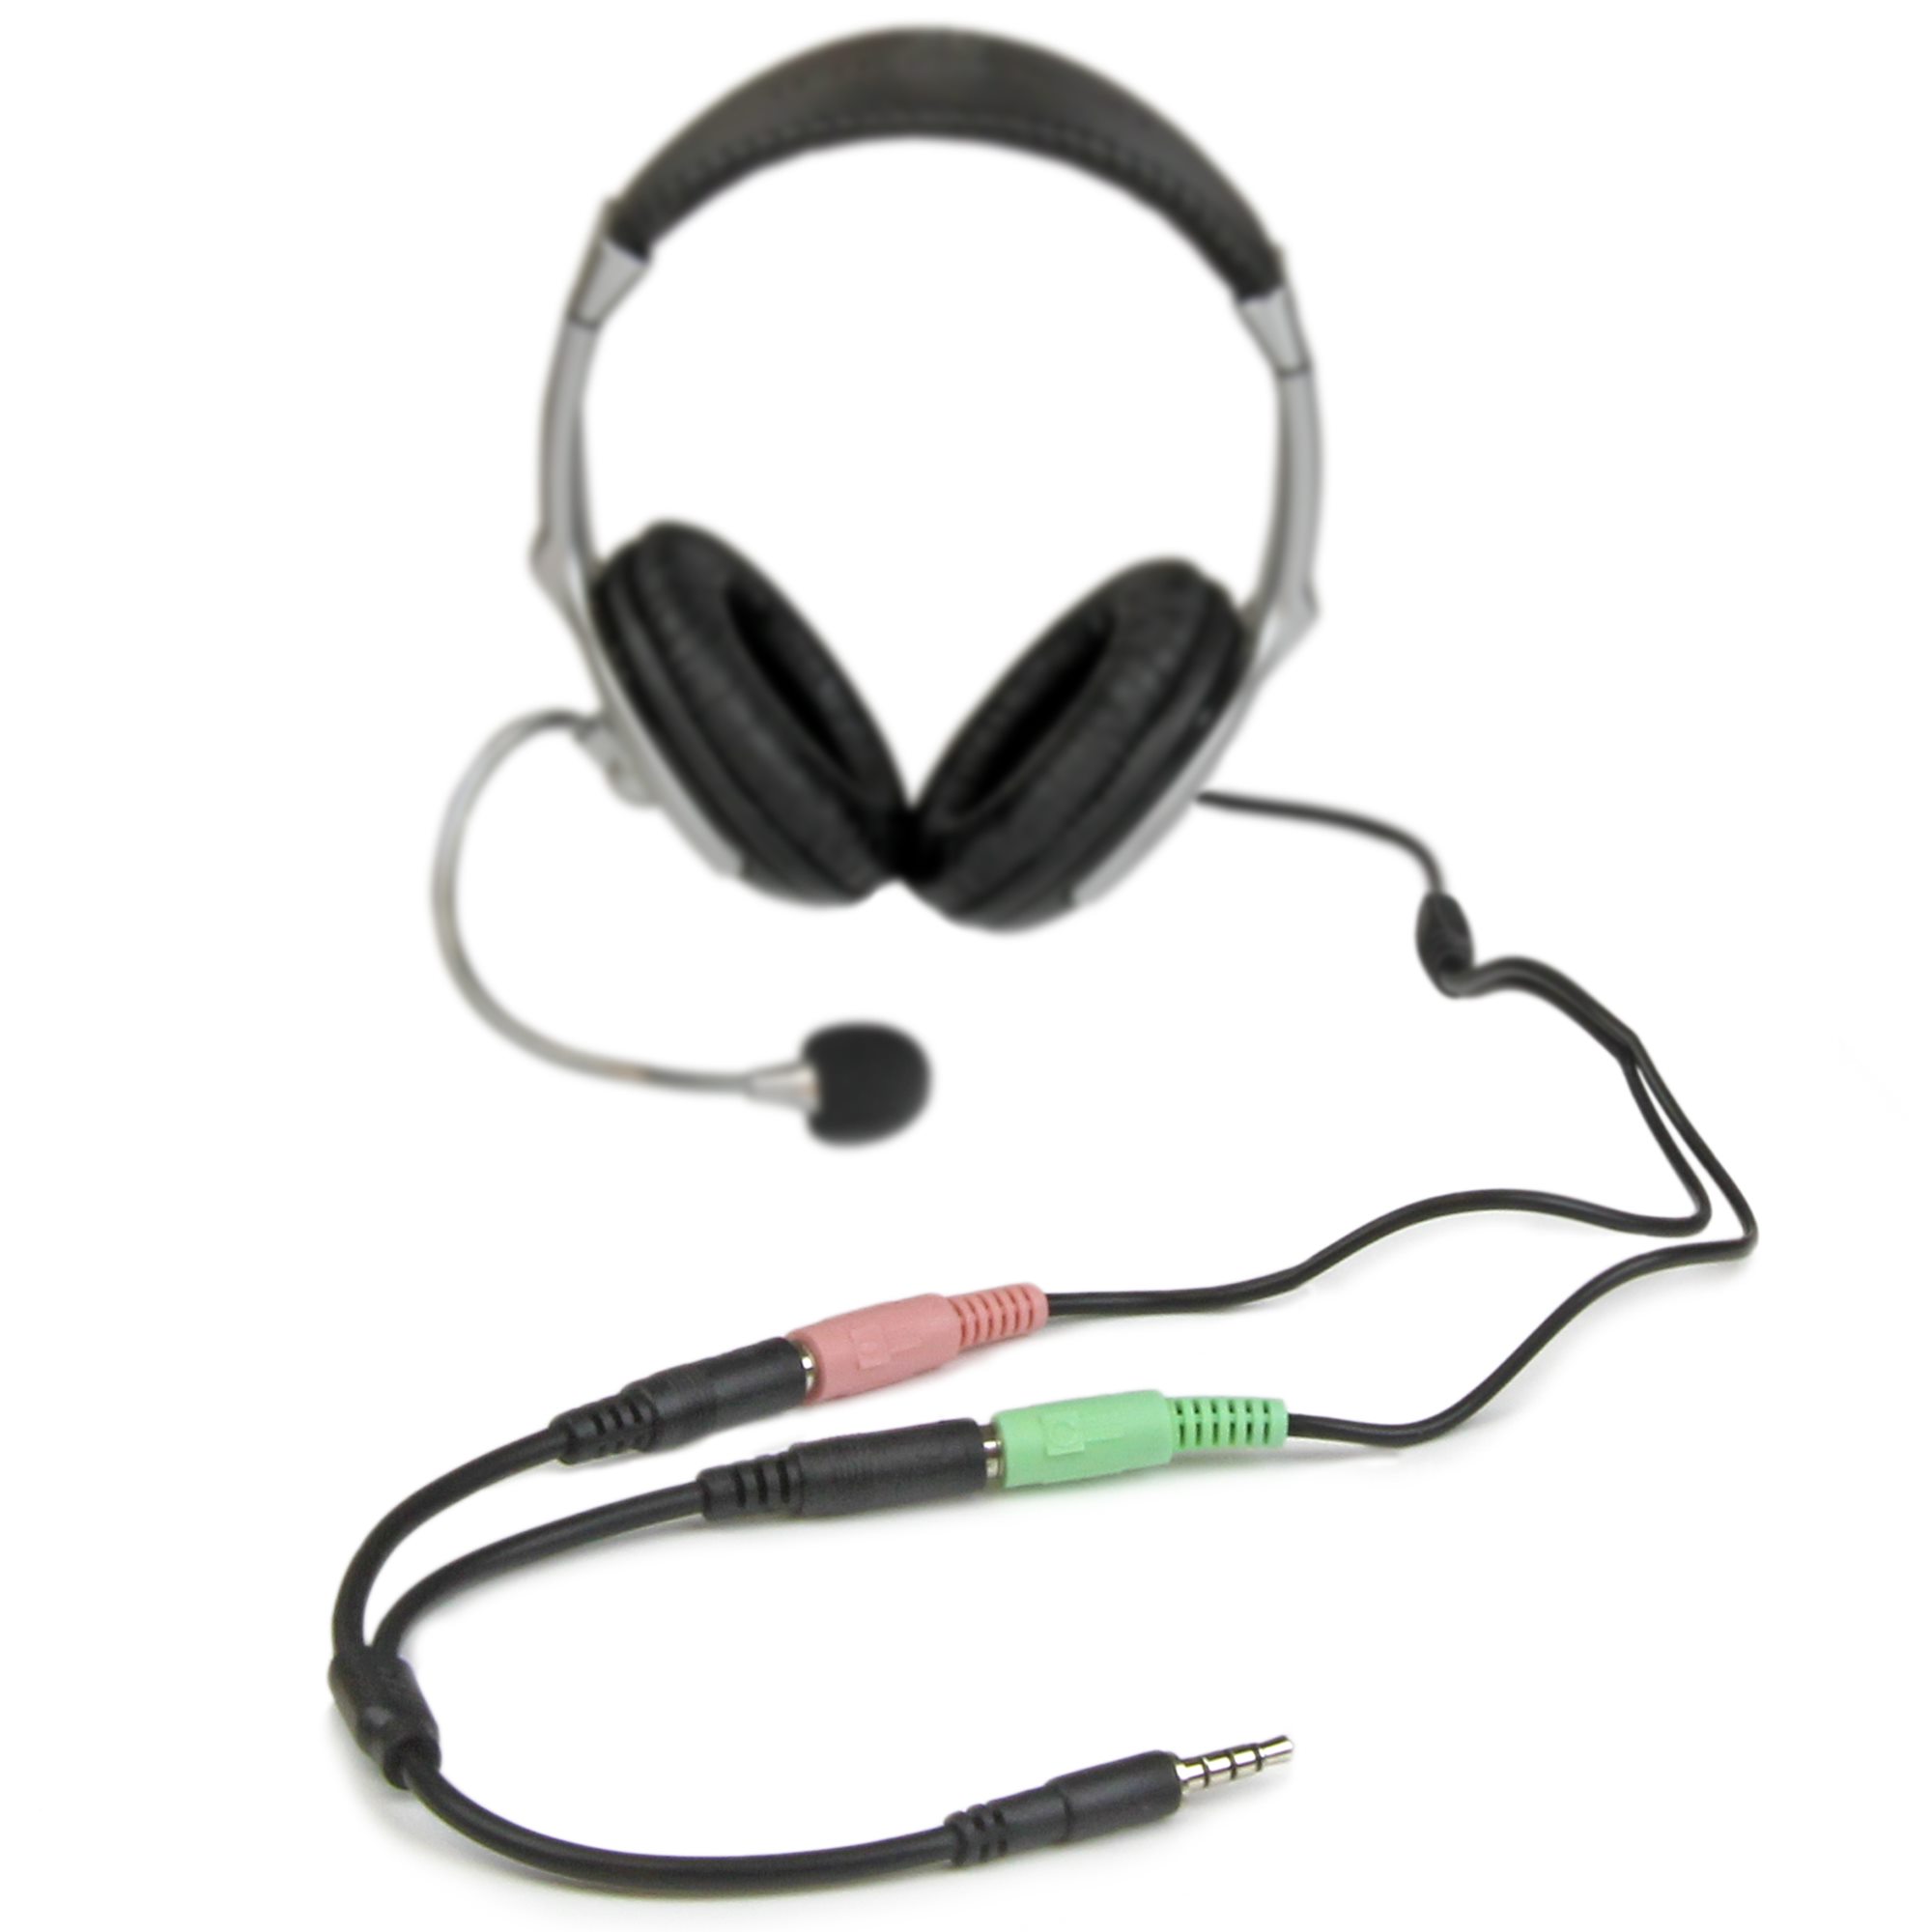 Headset adapter with headphone/mic plugs - Audio Cables and Adapters |